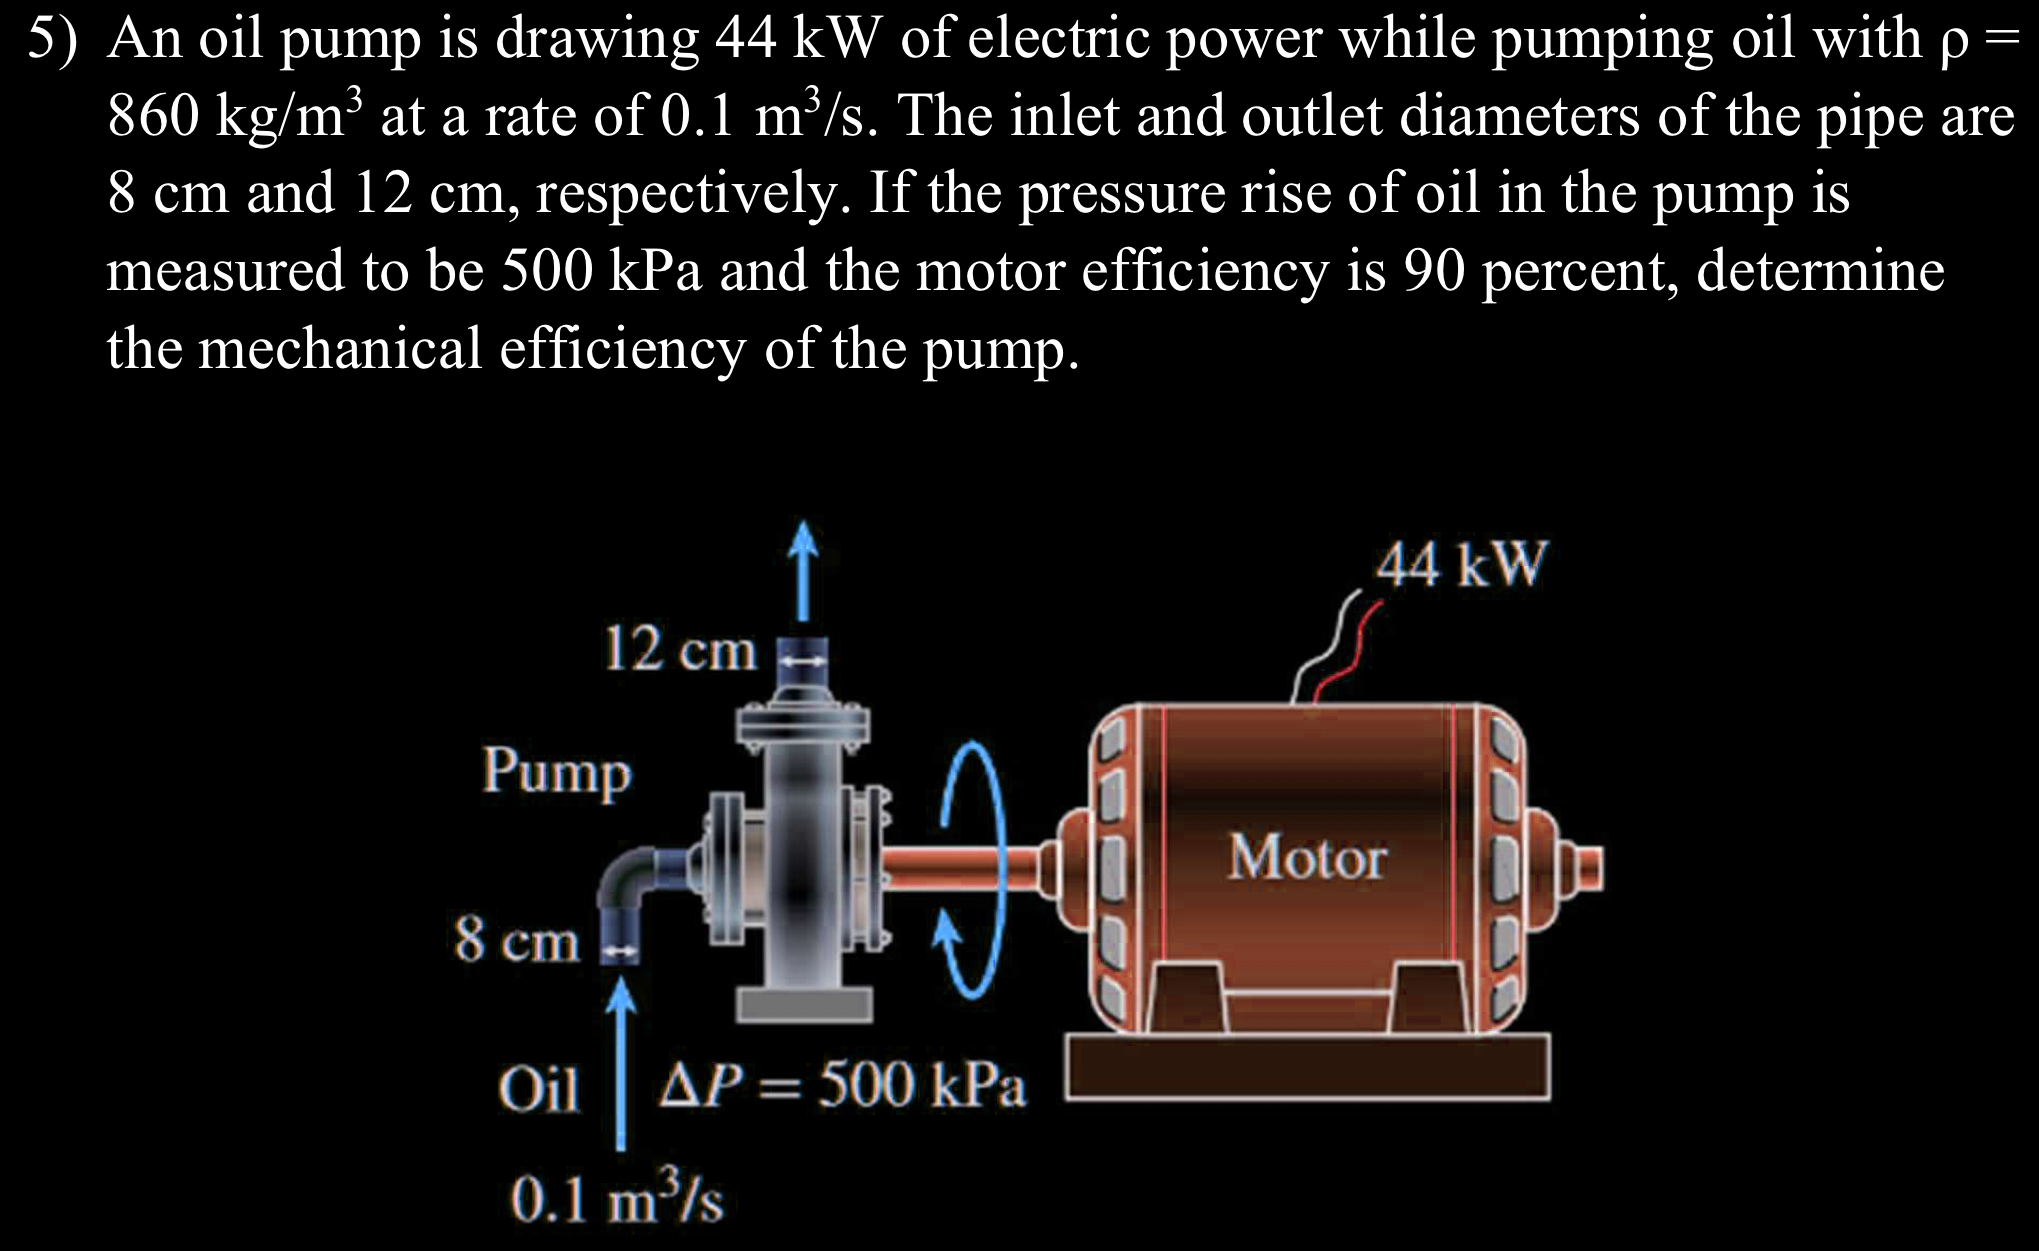 Solved 5) An oil pump is drawing 44 kW of electric power